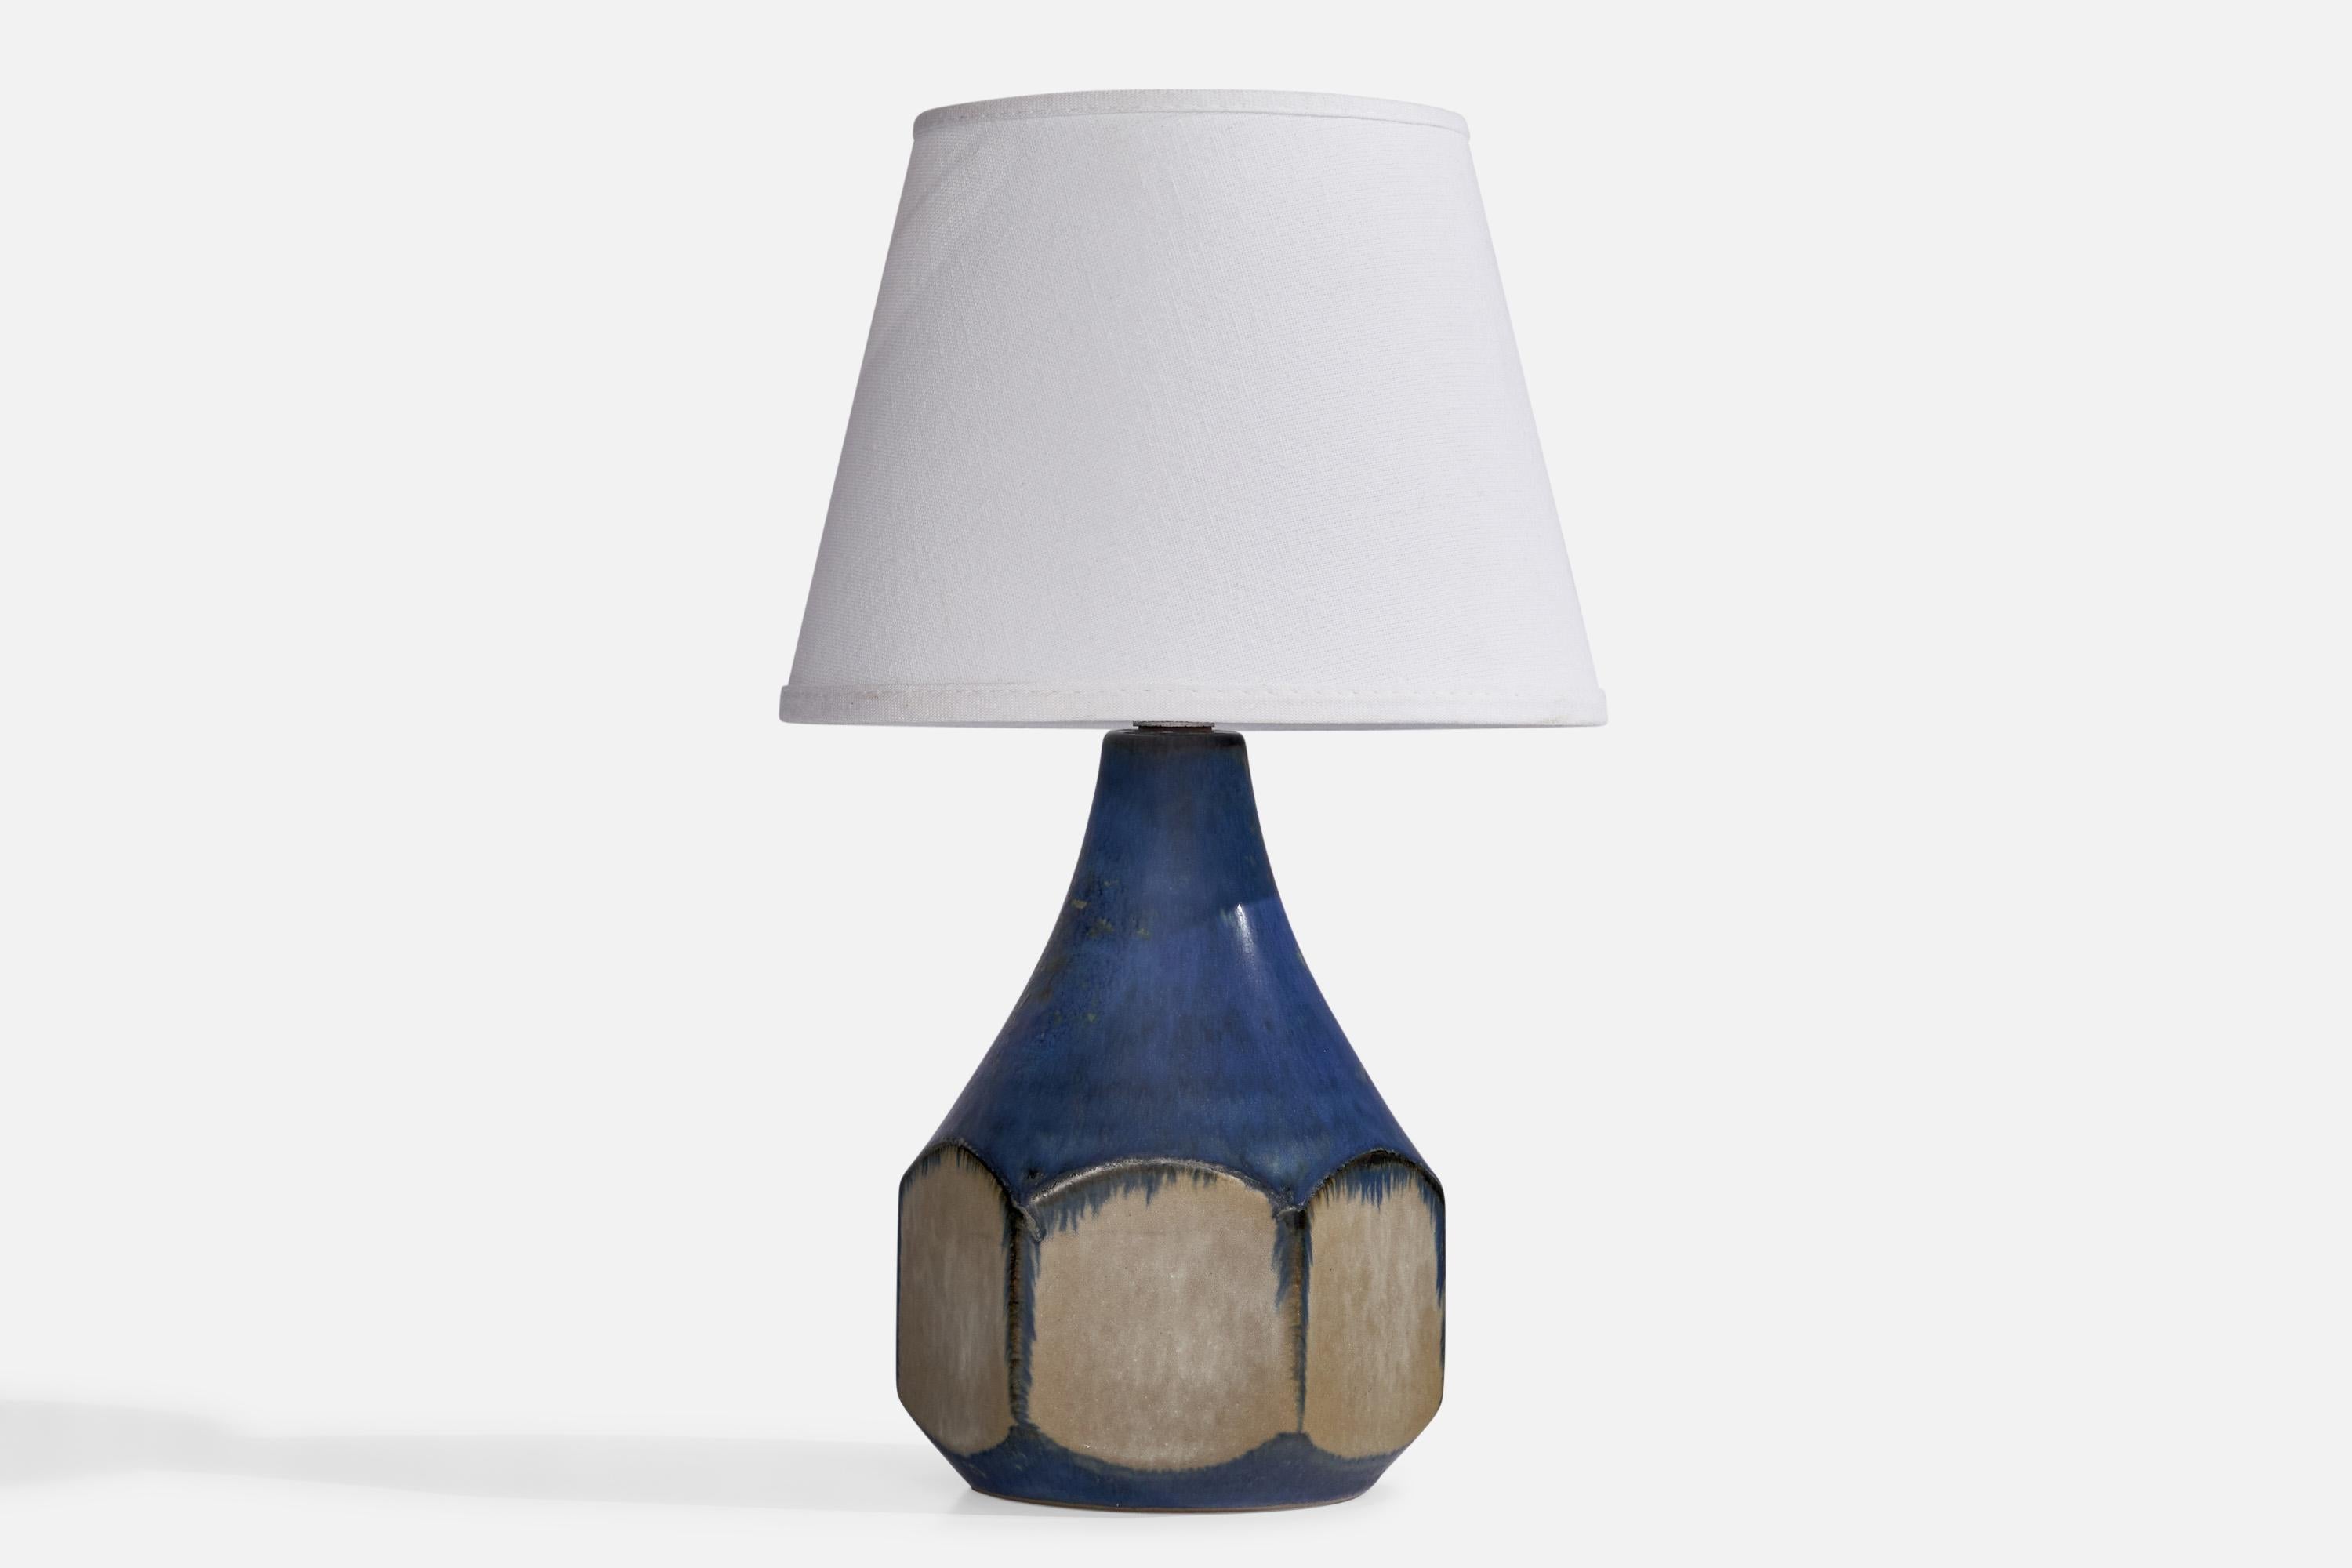 A blue-glazed stoneware table lamp designed by Marianne Starck and produced by Michael Andersen, Bornholm, Denmark, 1960s.

Dimensions of Lamp (inches): 9.5” H x 5” Diameter
Dimensions of Shade (inches): 5.25” Top Diameter x 8” Bottom Diameter x 6”